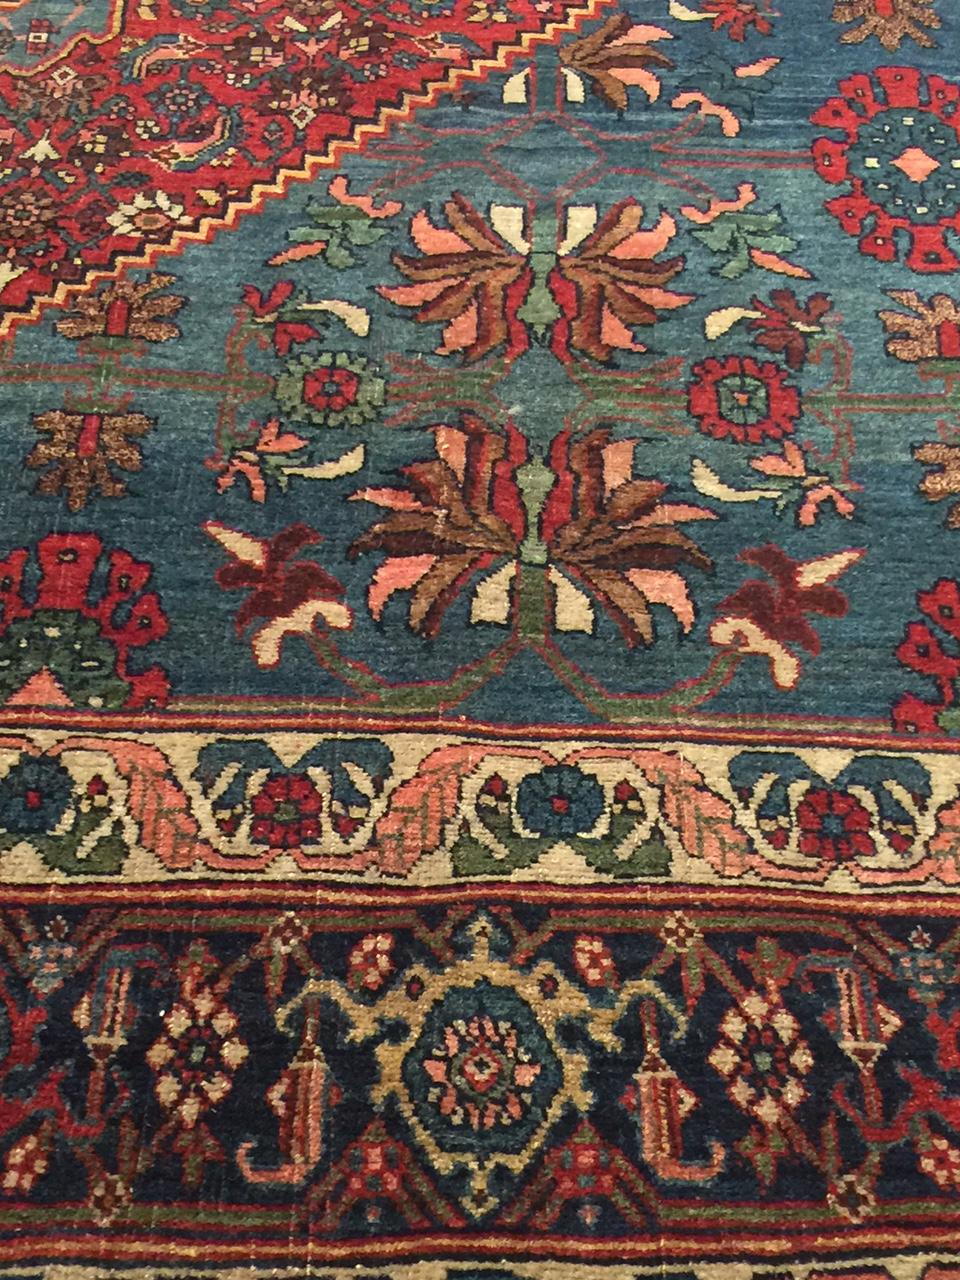 Antique Persian Bidjar Rug, 7'9 x 12'2. iA lovely hand knotted Persian Bidjar rug. Renowned for their superb artistry, craftsmanship, and excellent material, and can be distinguished by their heavy wool foundation. Colors: deep brick/navy